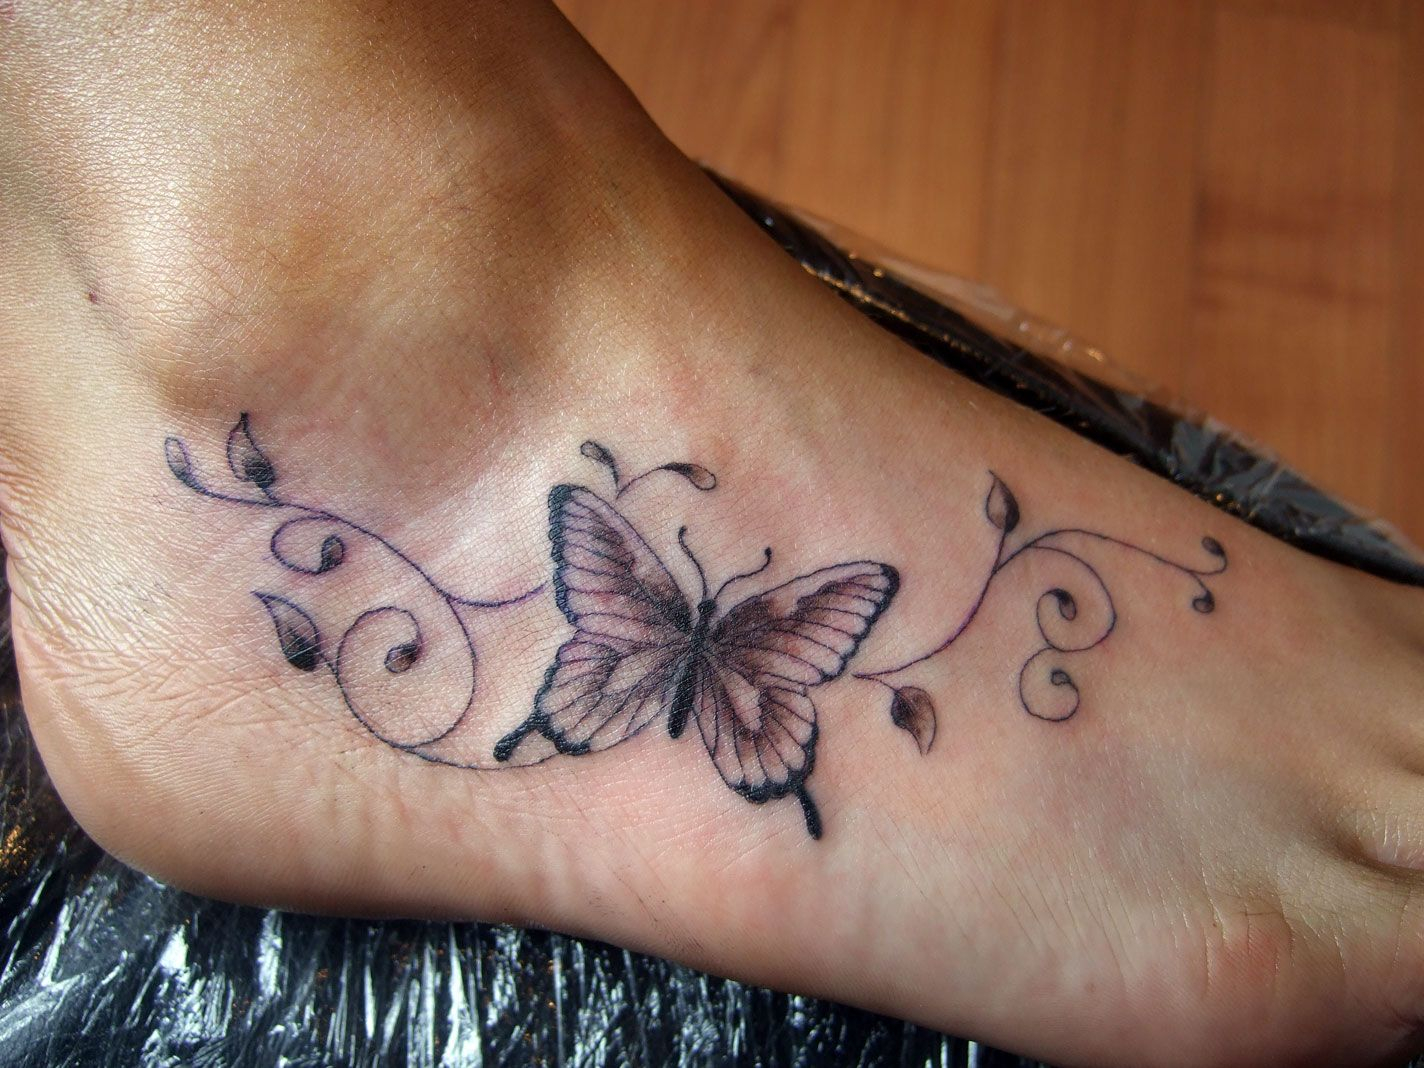 Awesome Butterfly Tattoos On Foot Design Stylendesigns within measurements 1424 X 1068